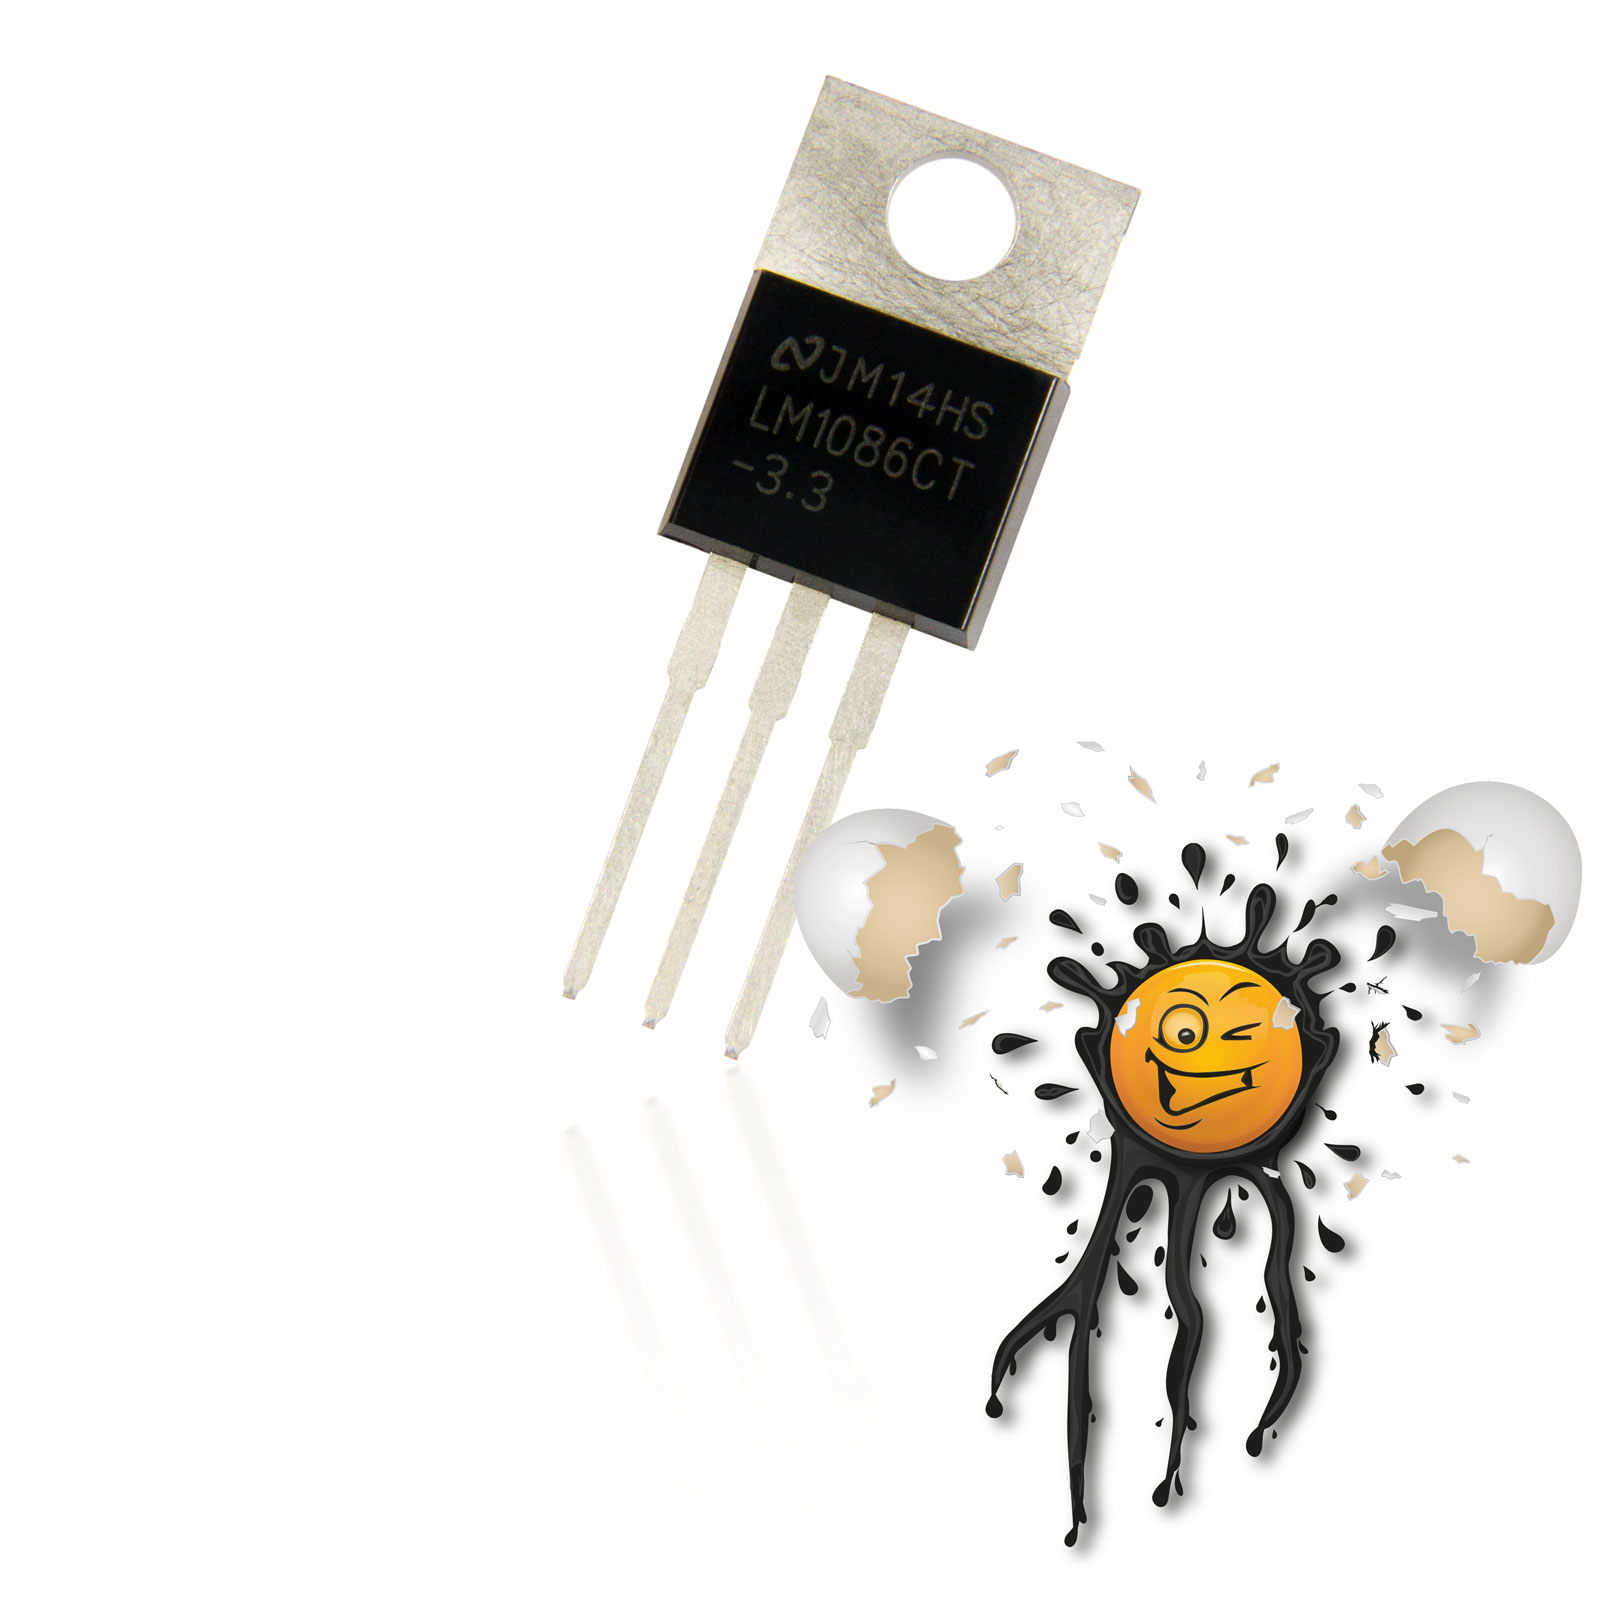 LM1086 CT 3,3V TO220 bis zu 27Vin 1,5A LDO Low Drop Out… – IoT powered by